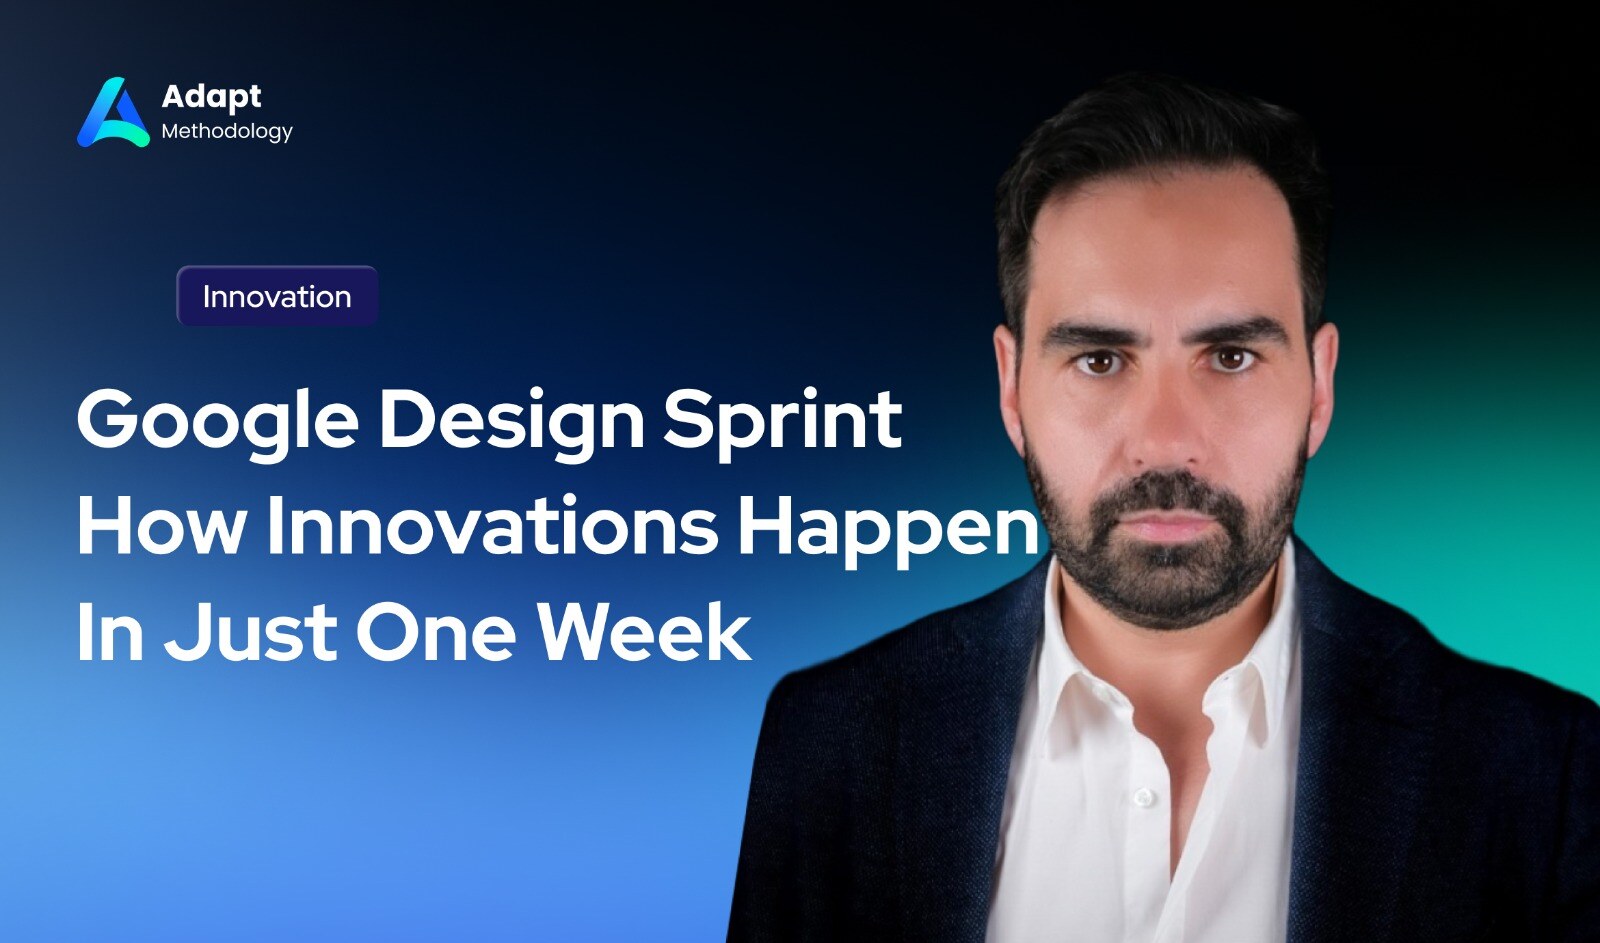 Google Design Sprint How Innovations Happen In Just One Week